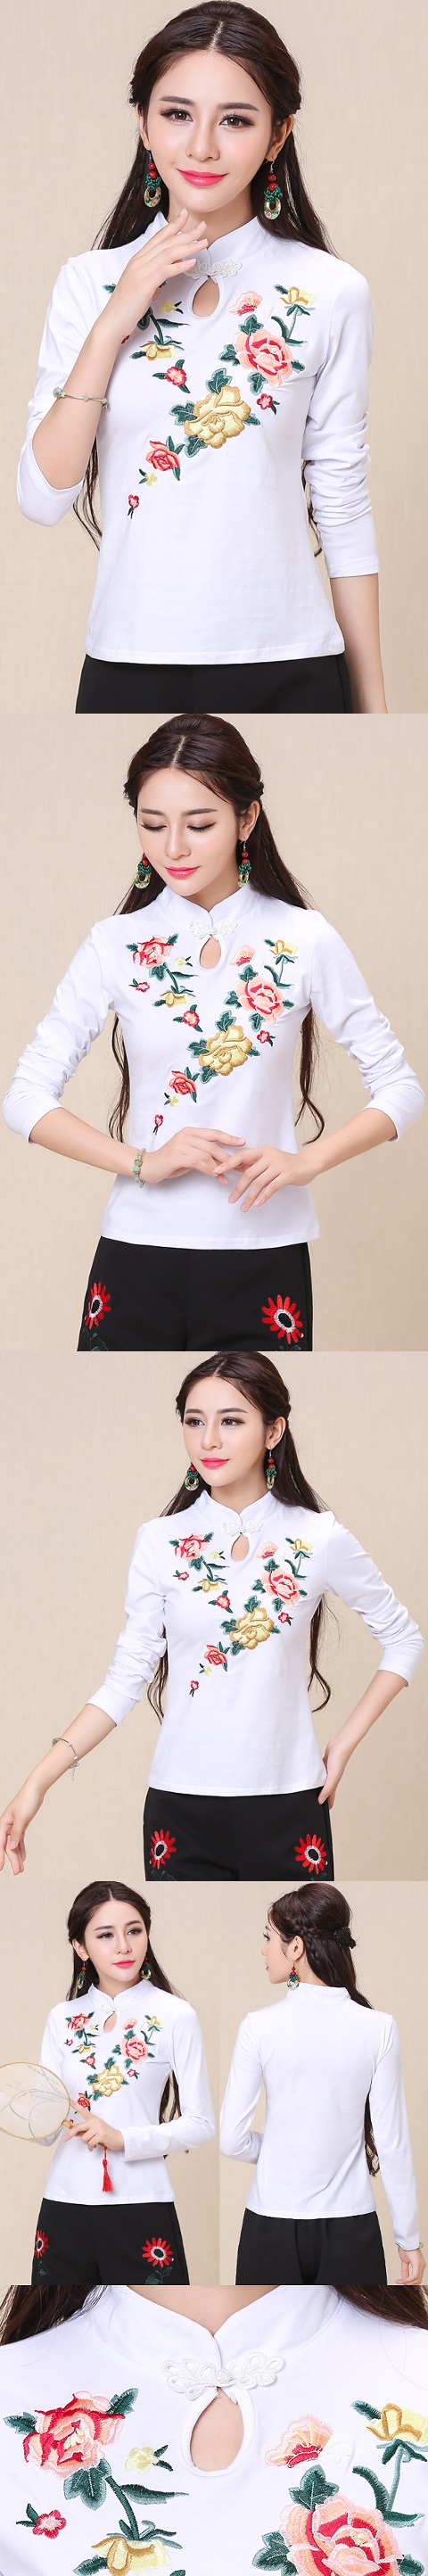 Ethnic Floral Embroidery Long-sleeve Blouse - White (RM)